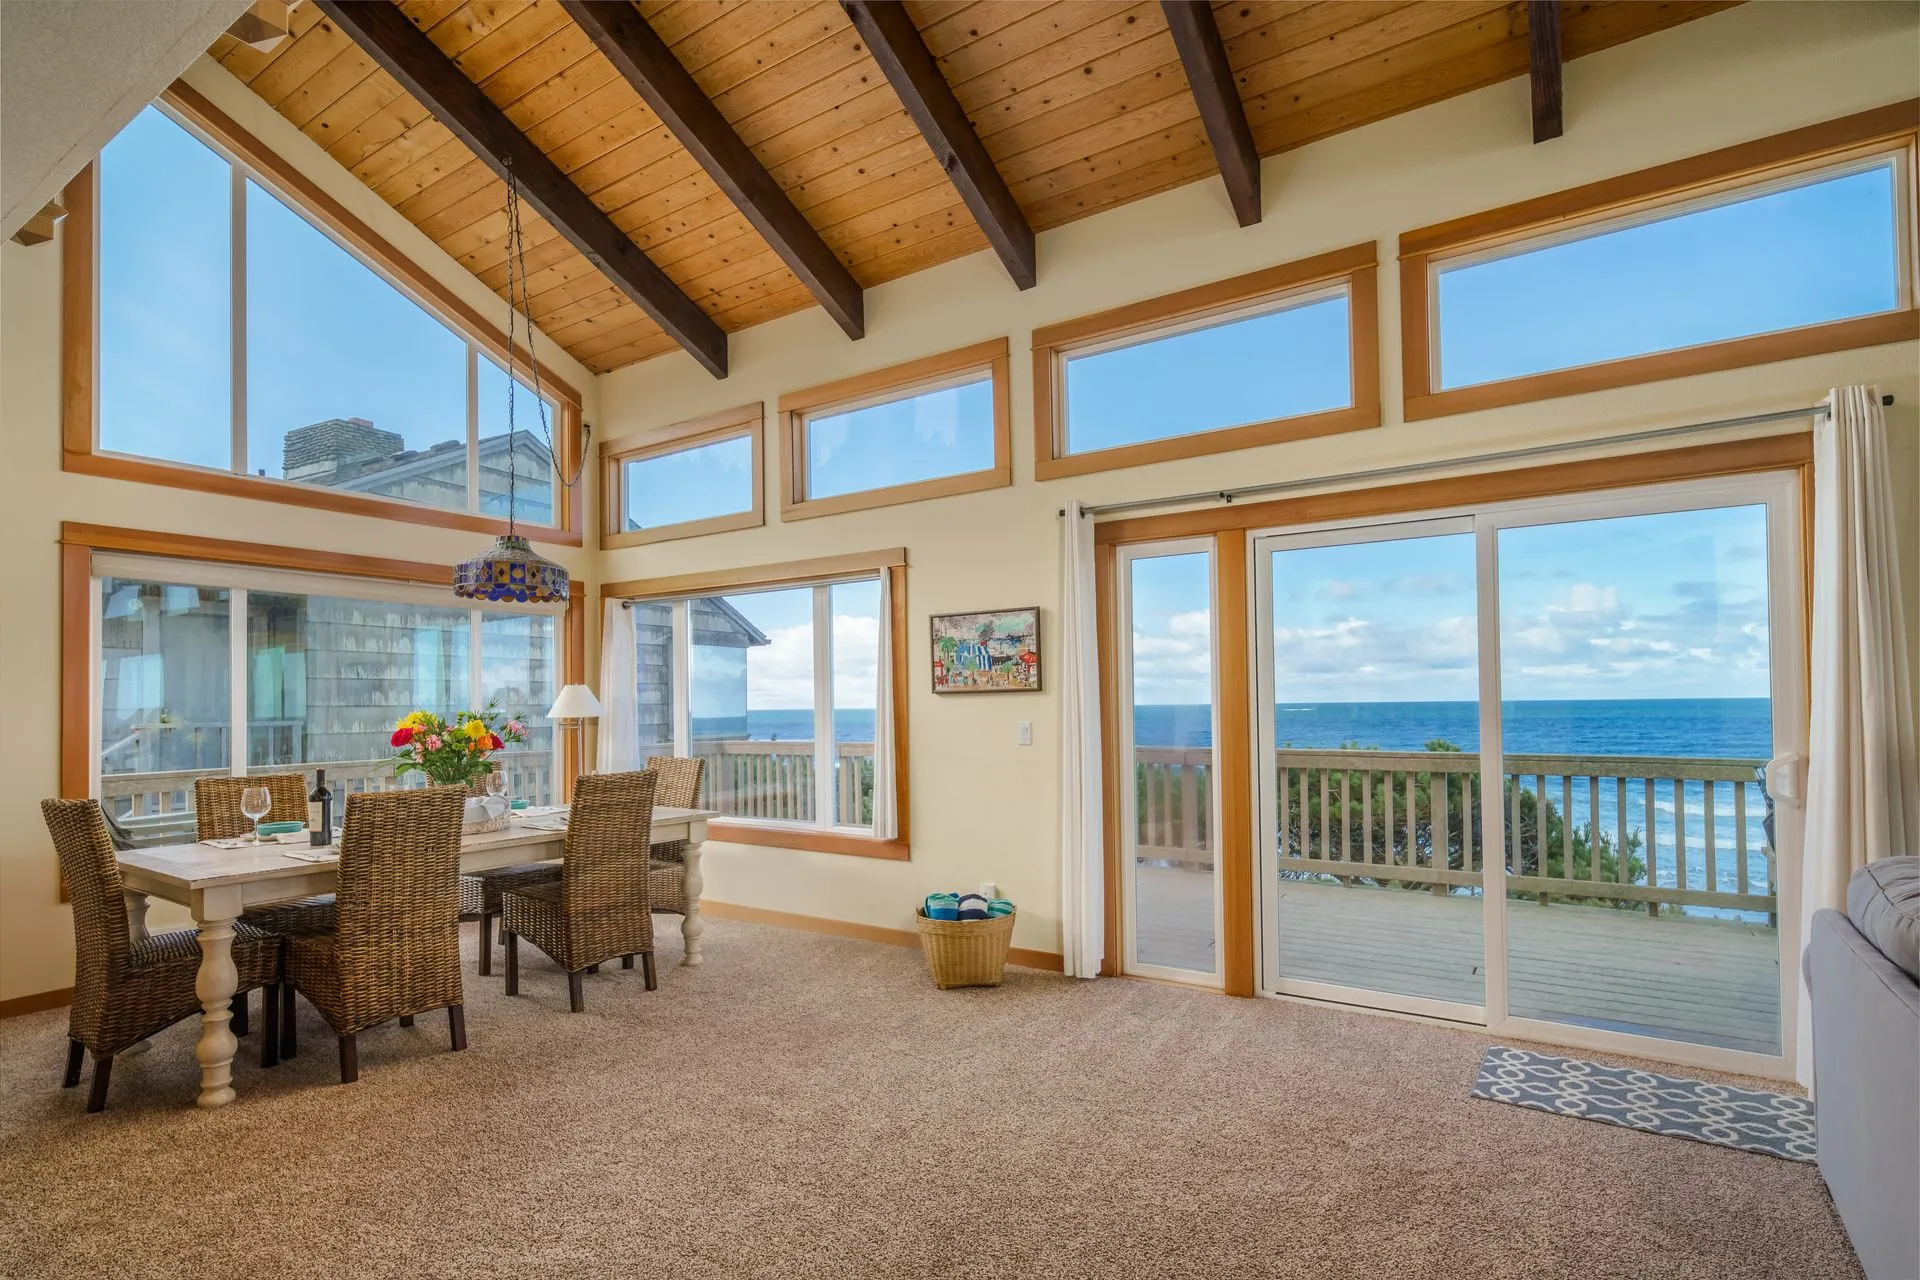 Vacation Rental in Cannon Beach, Pacific House living room with view of the ocean and large porch